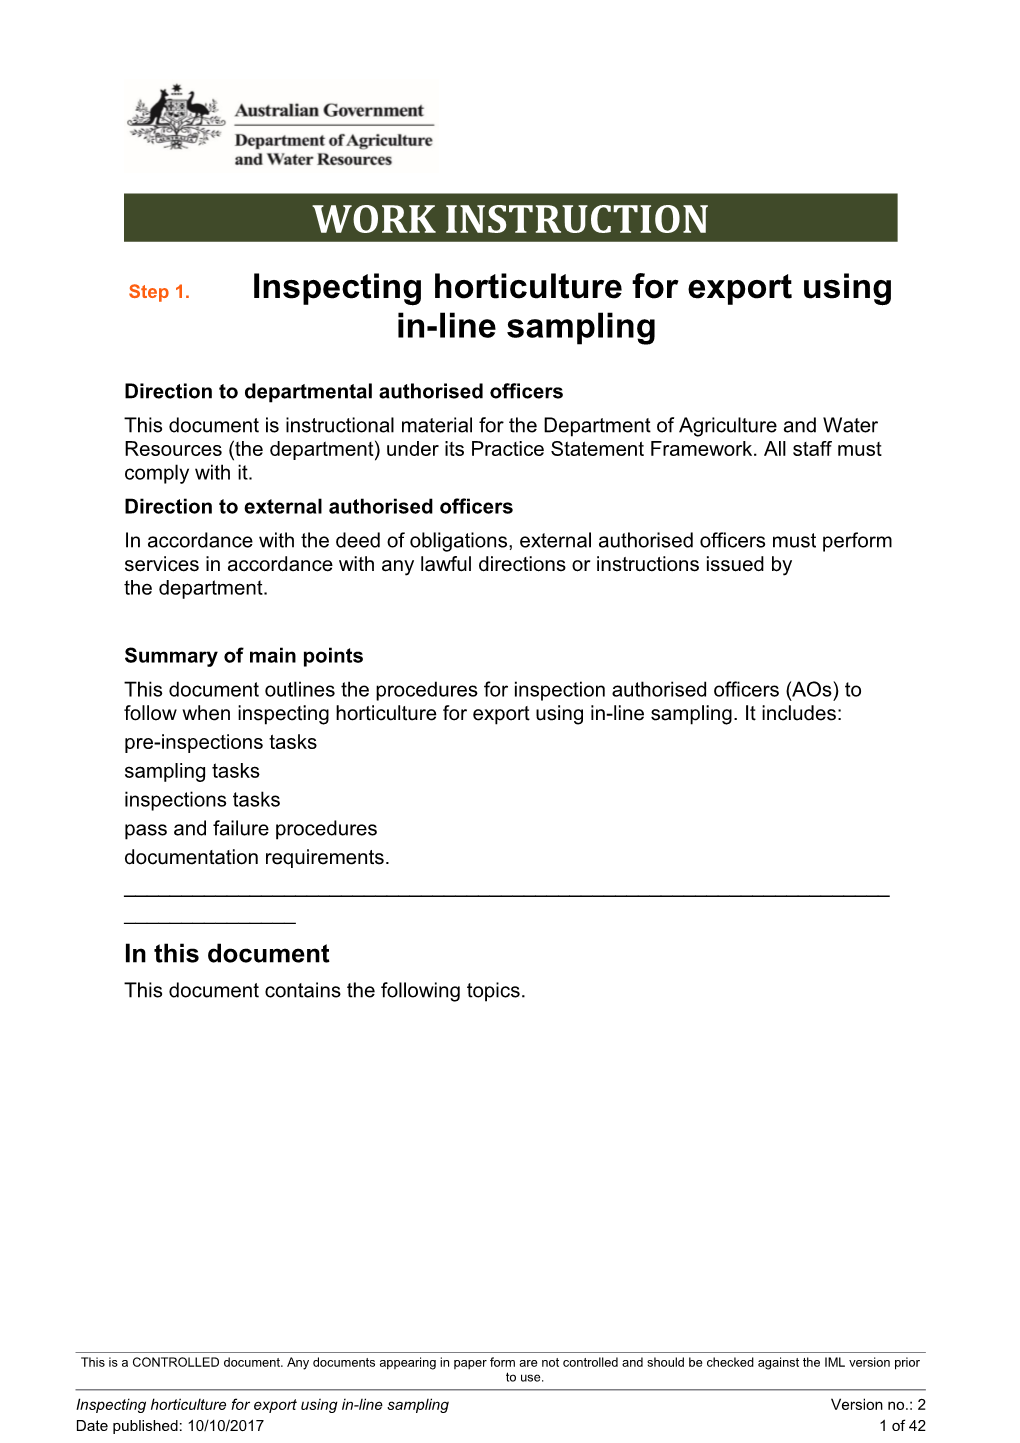 Inspecting Horticulture for Export Using In-Line Sampling